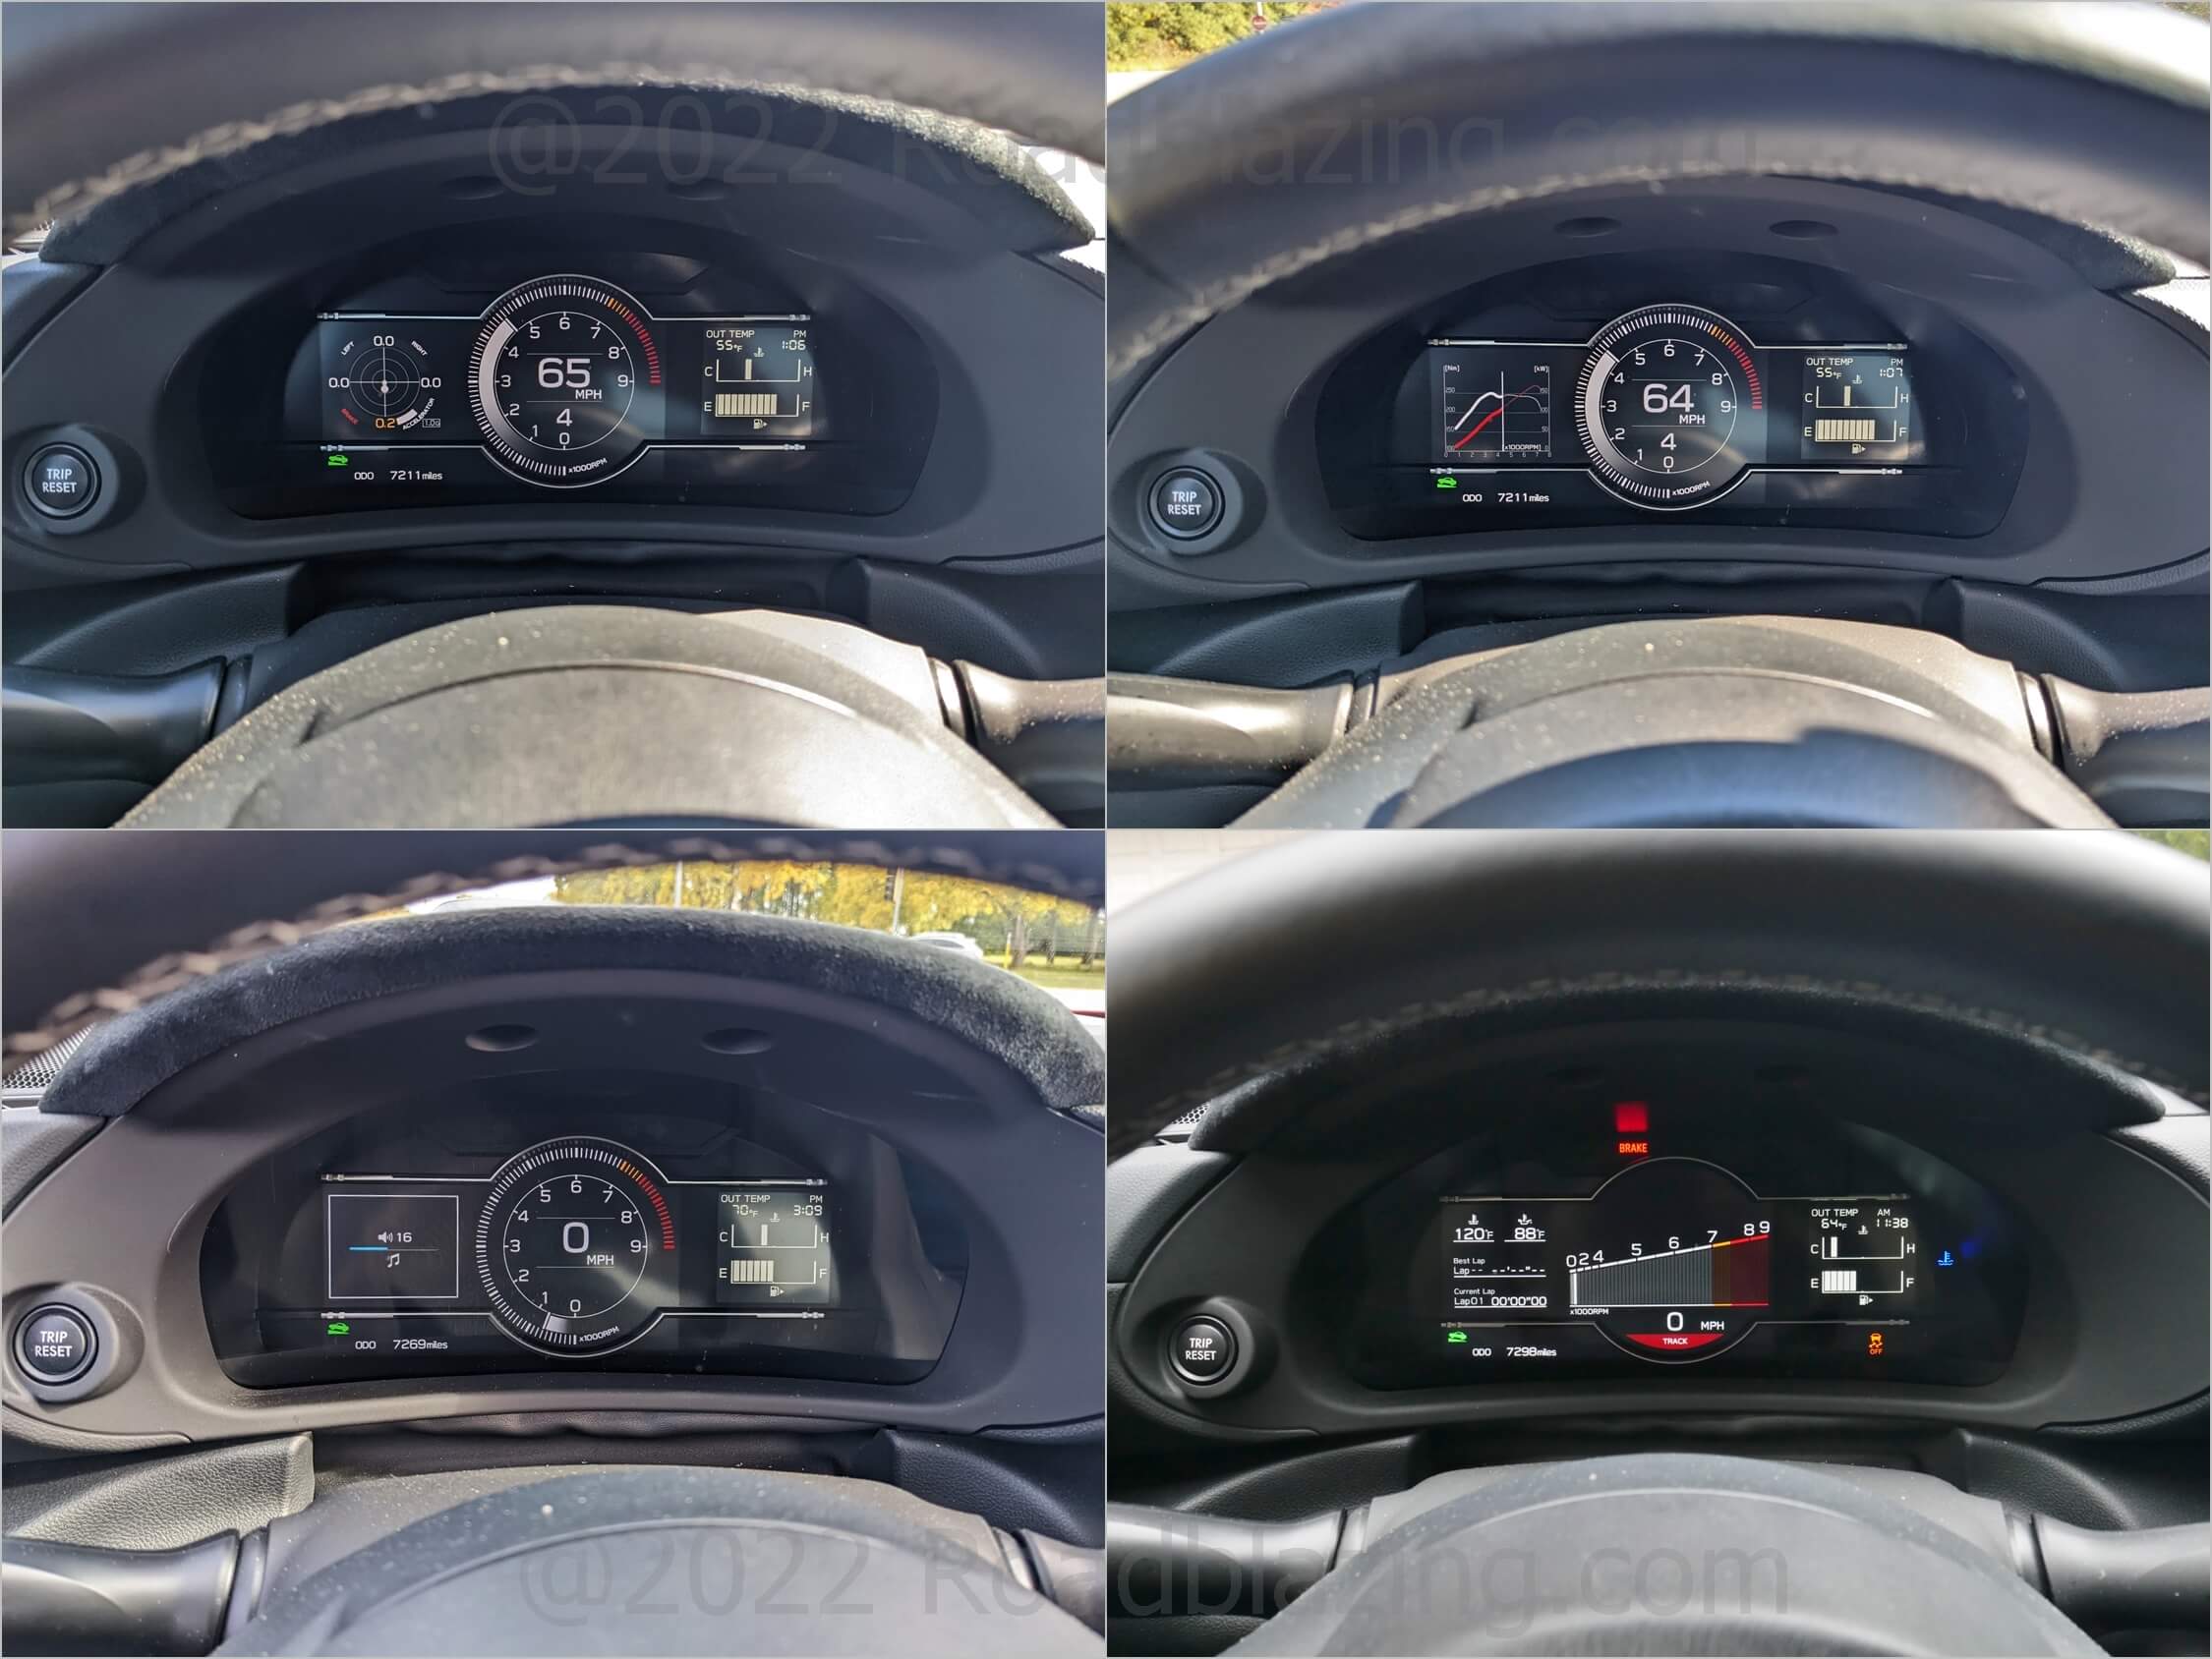 2022 Toyota GR 86: new 7.0" TFT gauge cluster with LCD data graphics & Stability Control defeated graph style display